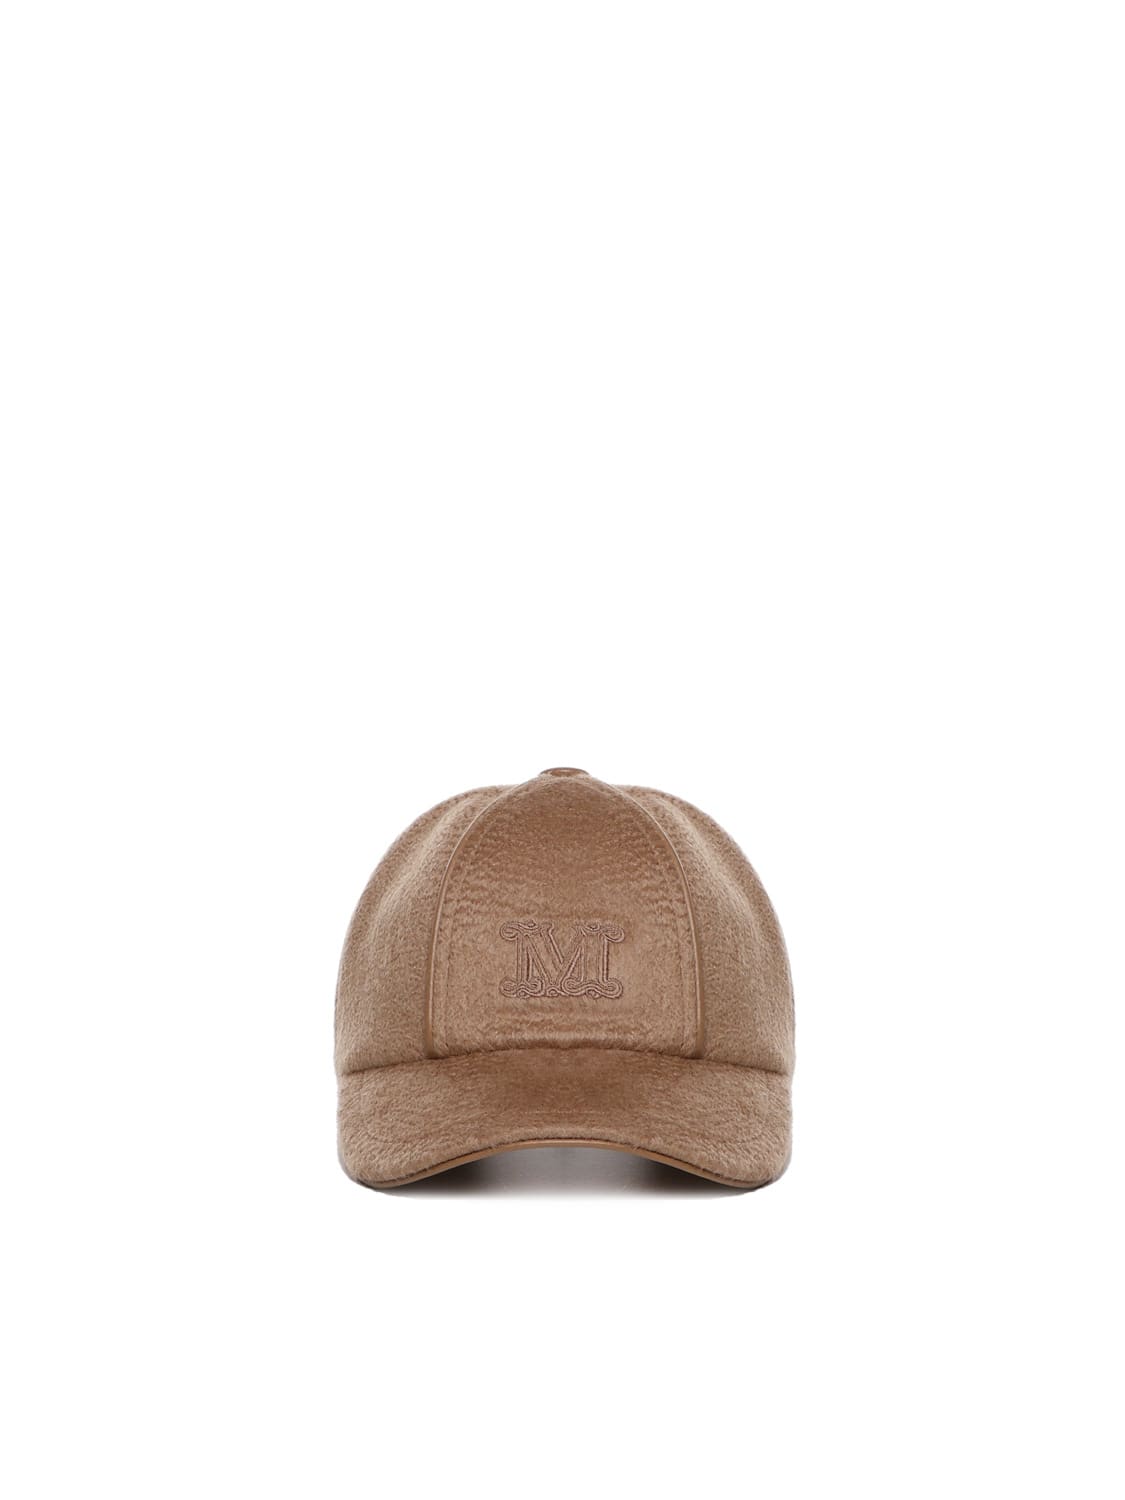 Cashmere Baseball Cap in Camel, Size XS/Small by Quince